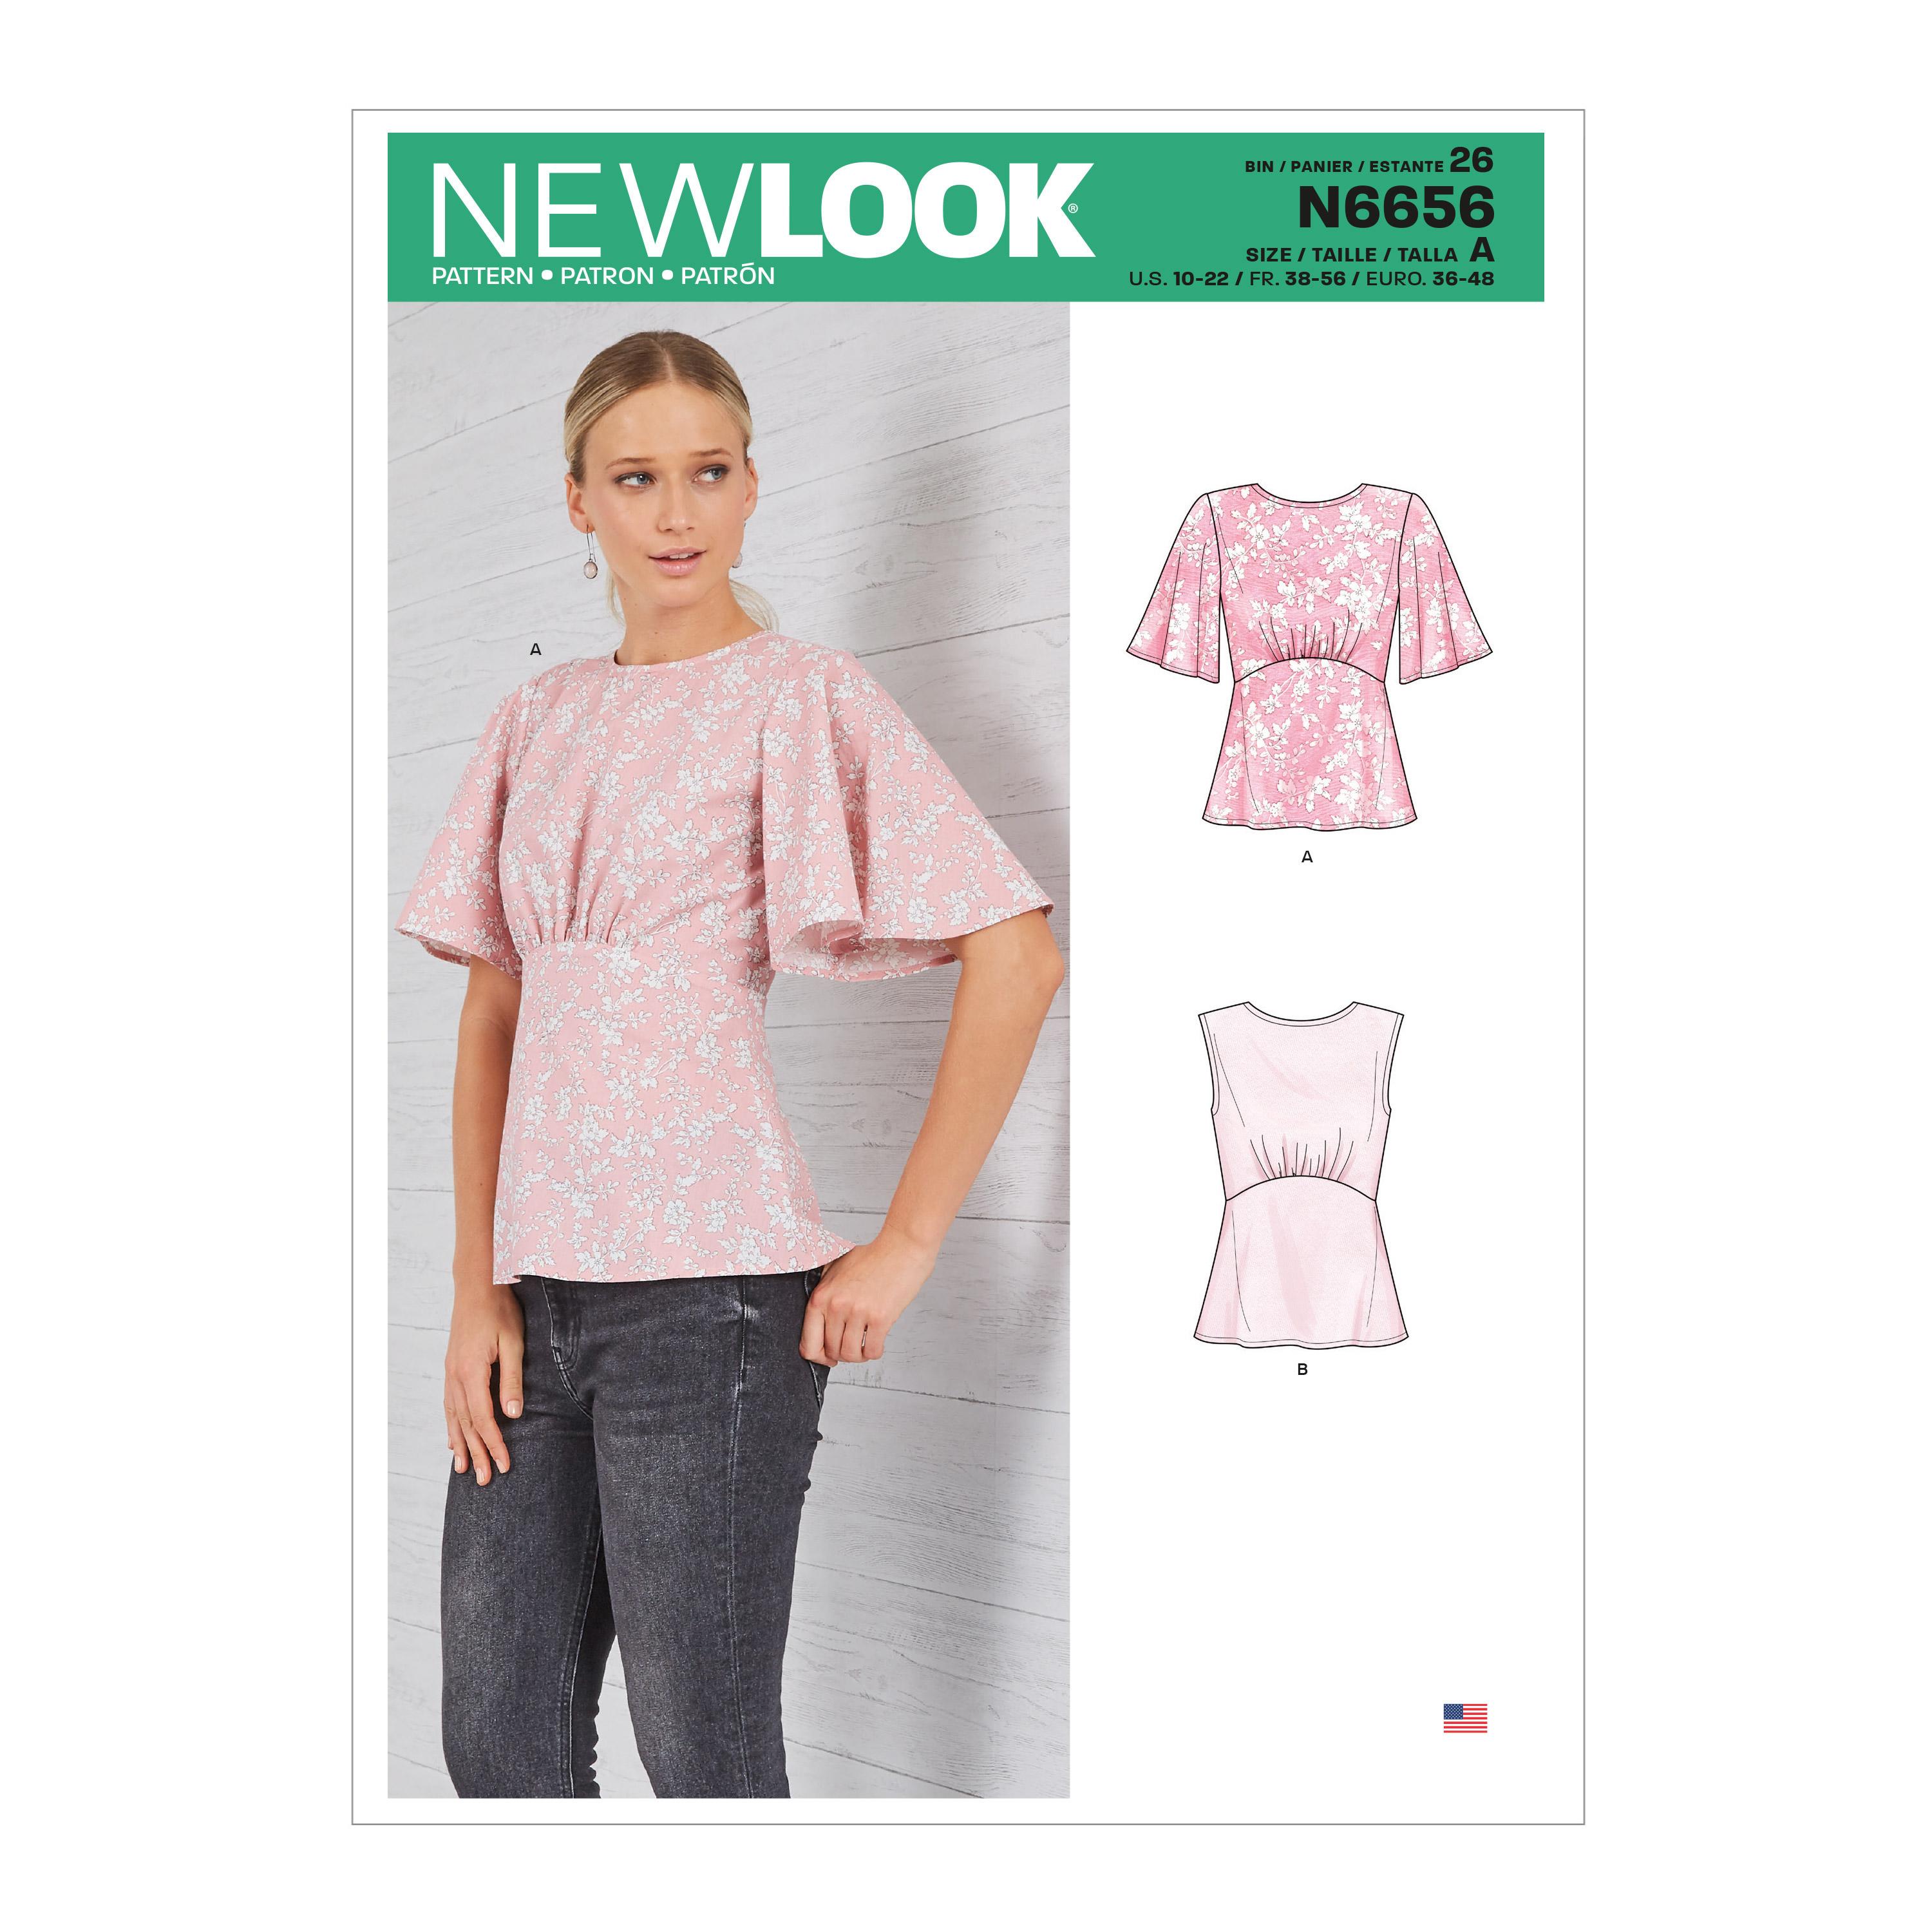 New Look Sewing Pattern N6656 Misses' Top With Optional Black Opening & Flared Sleeves